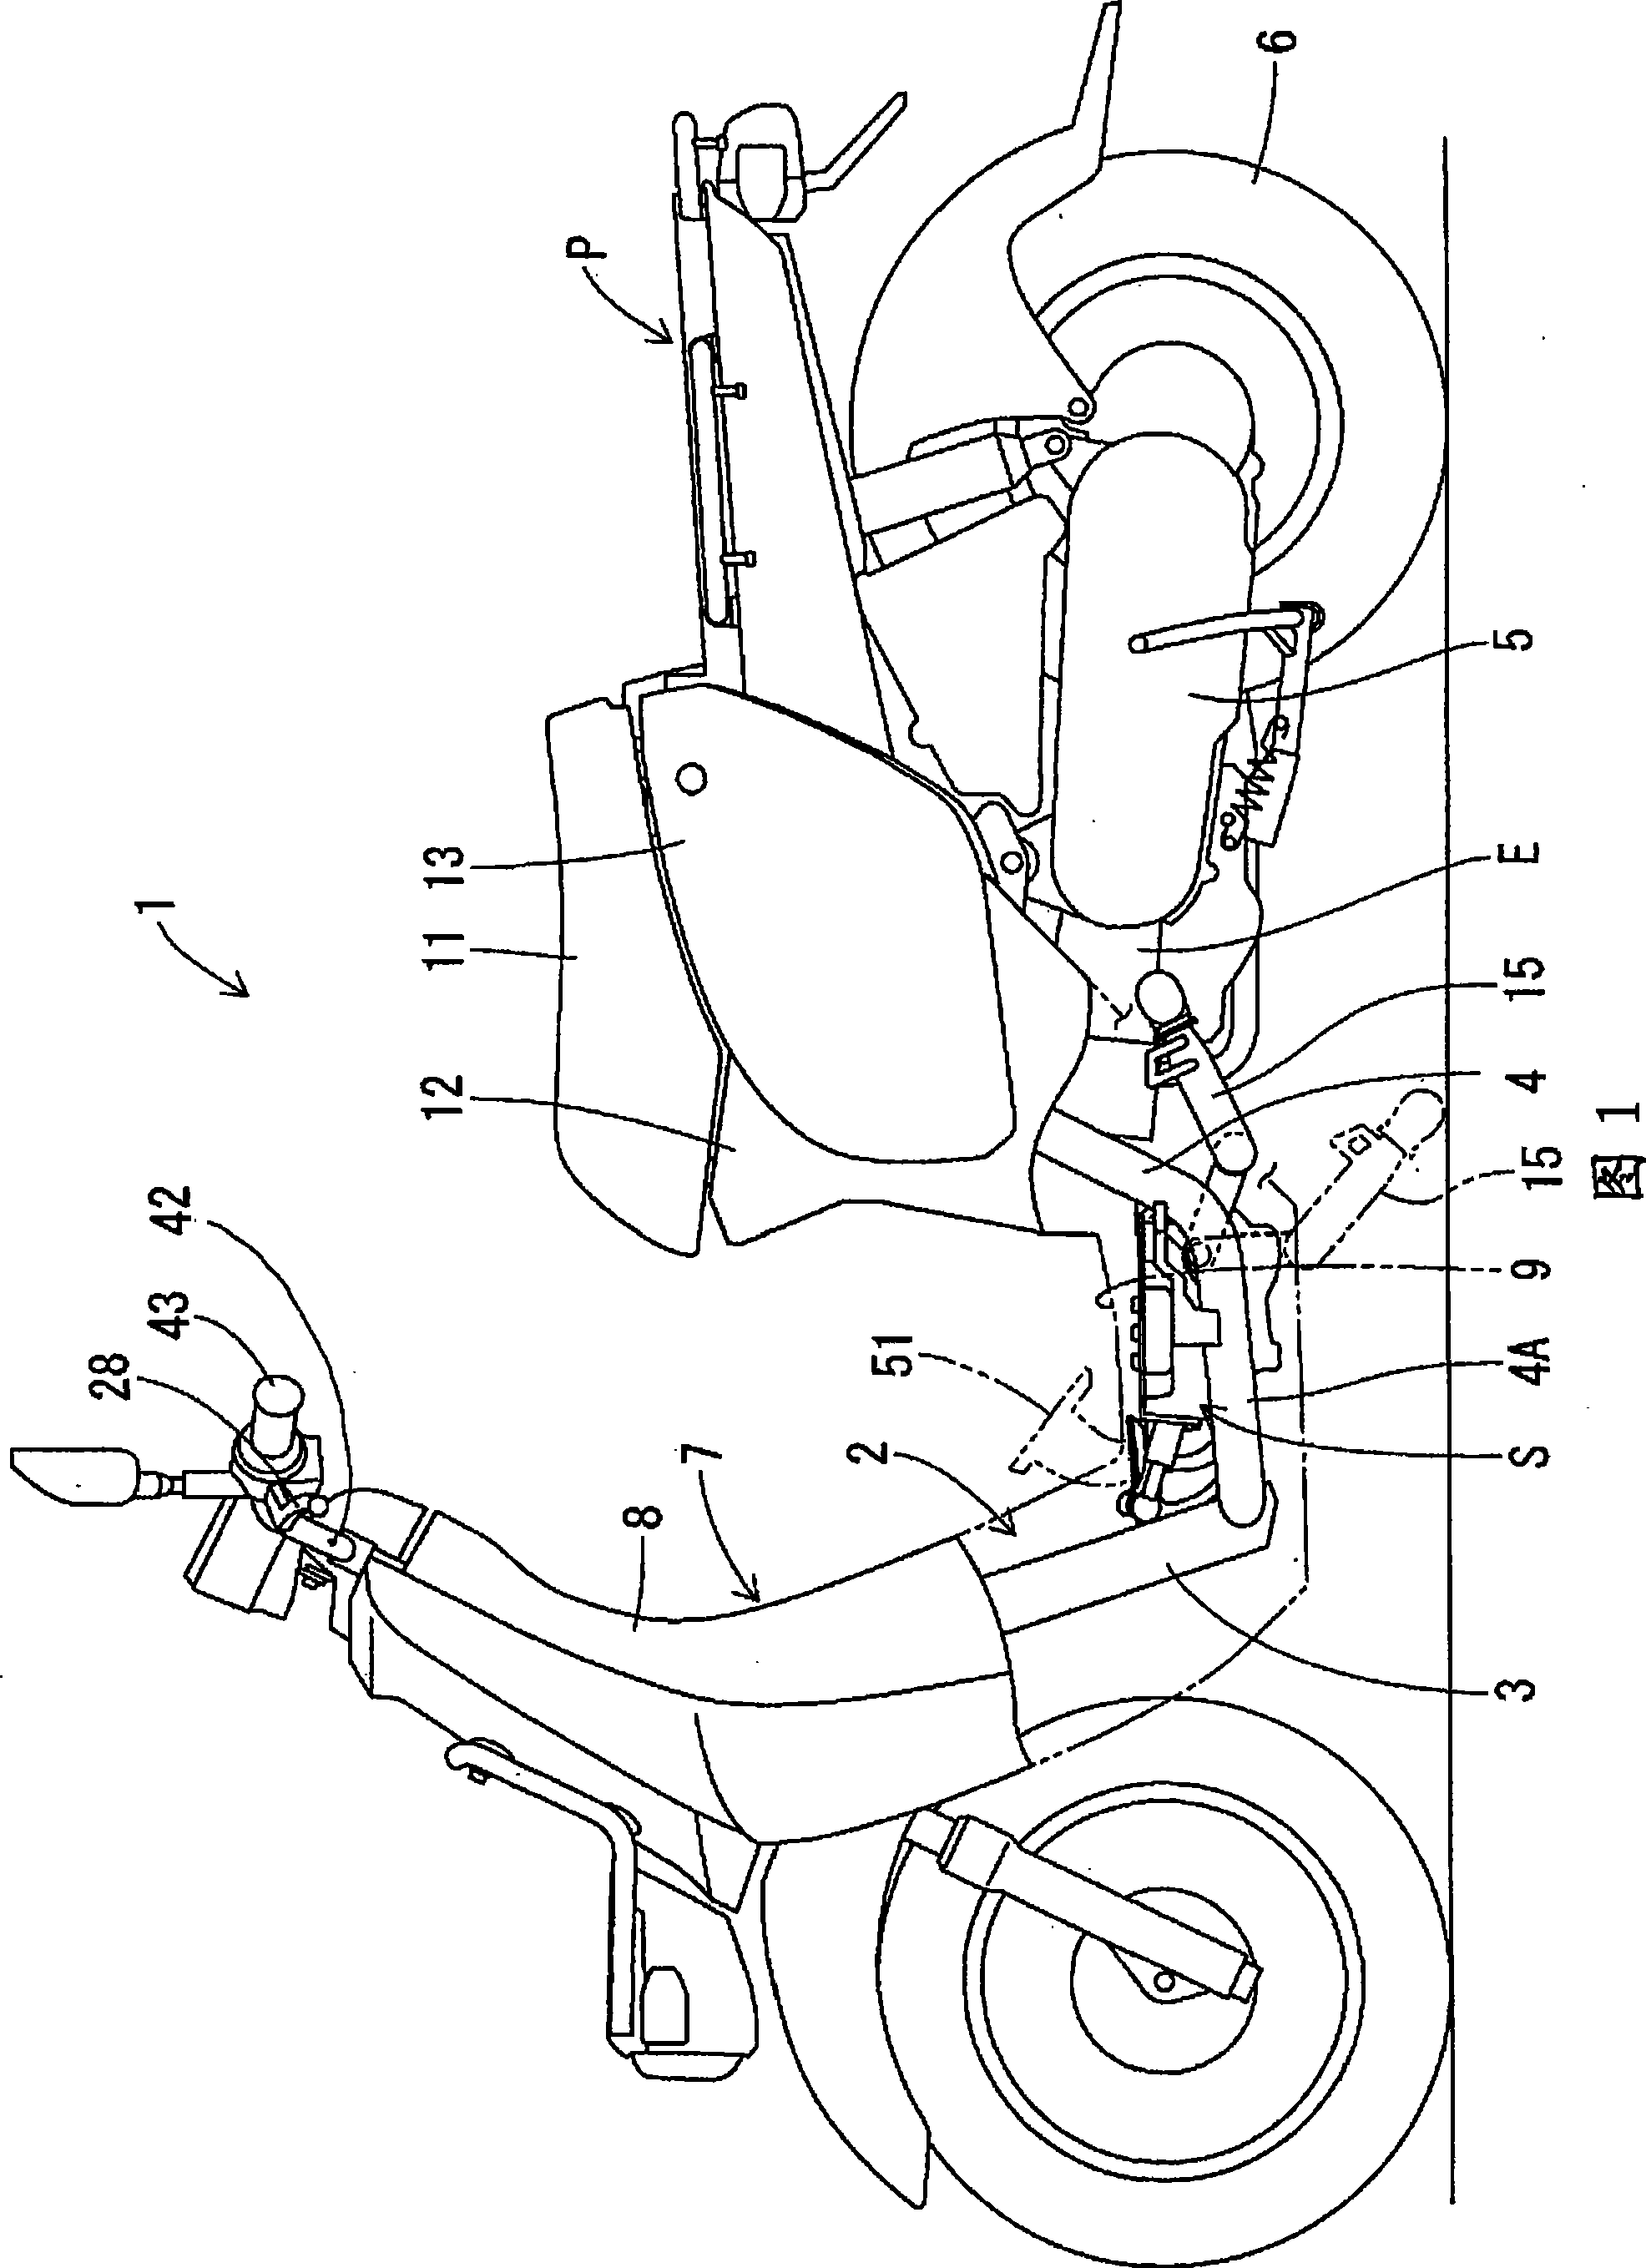 Support device for two-wheel motocycle